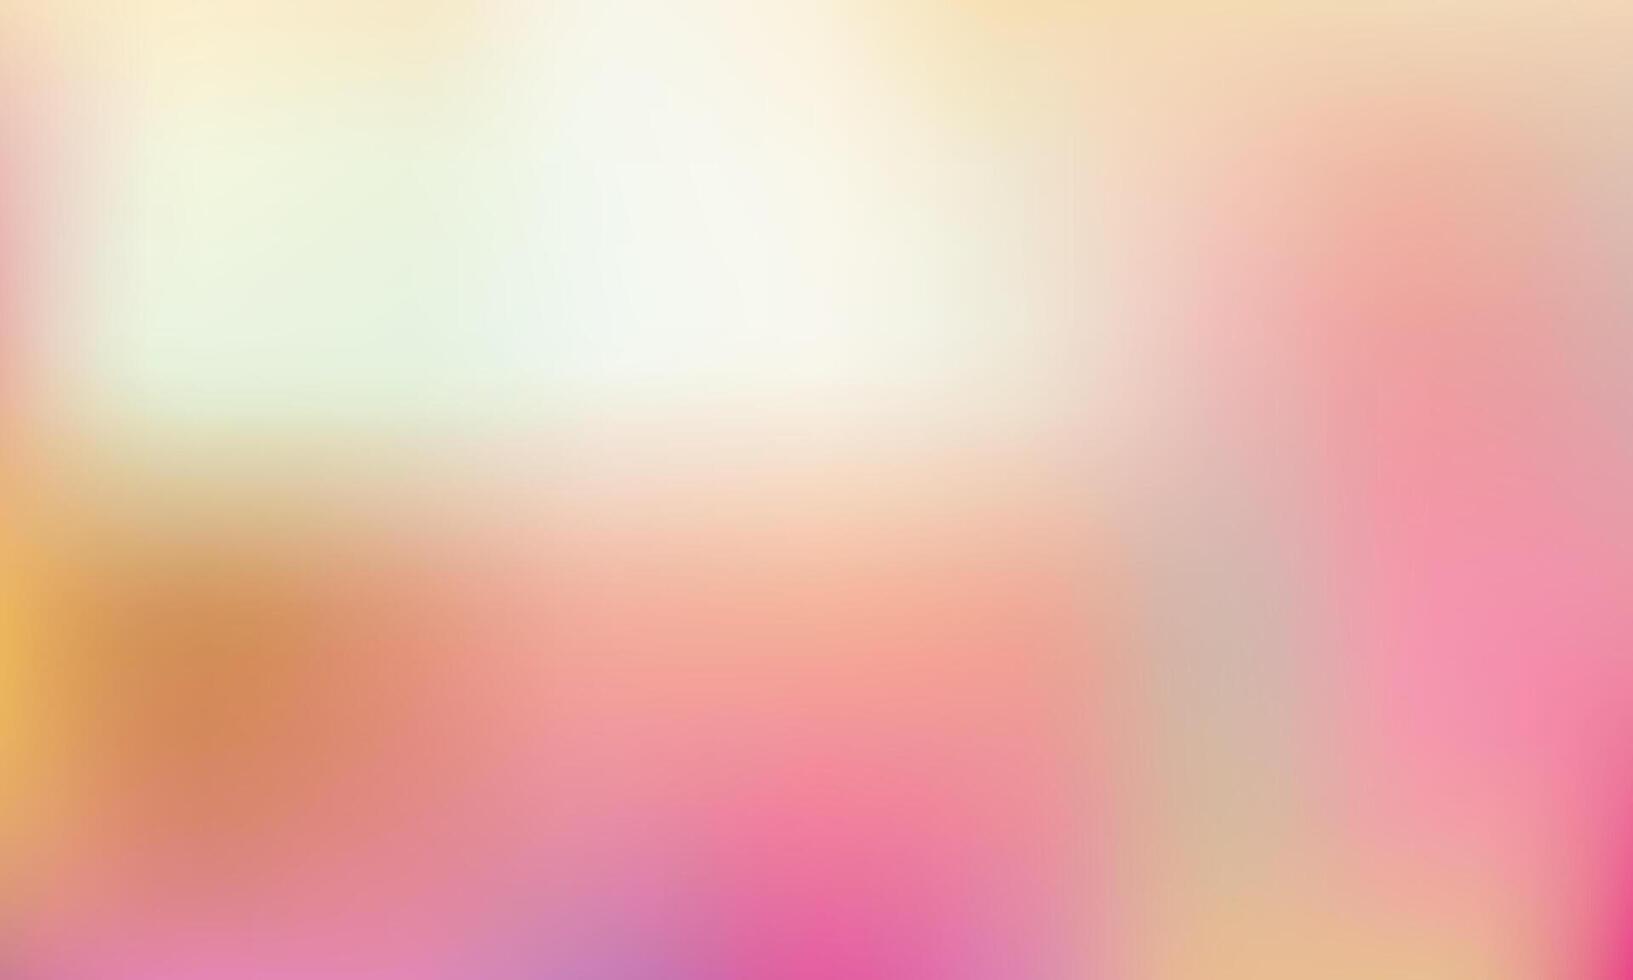 Vivid blurred colorful wallpaper background. vector